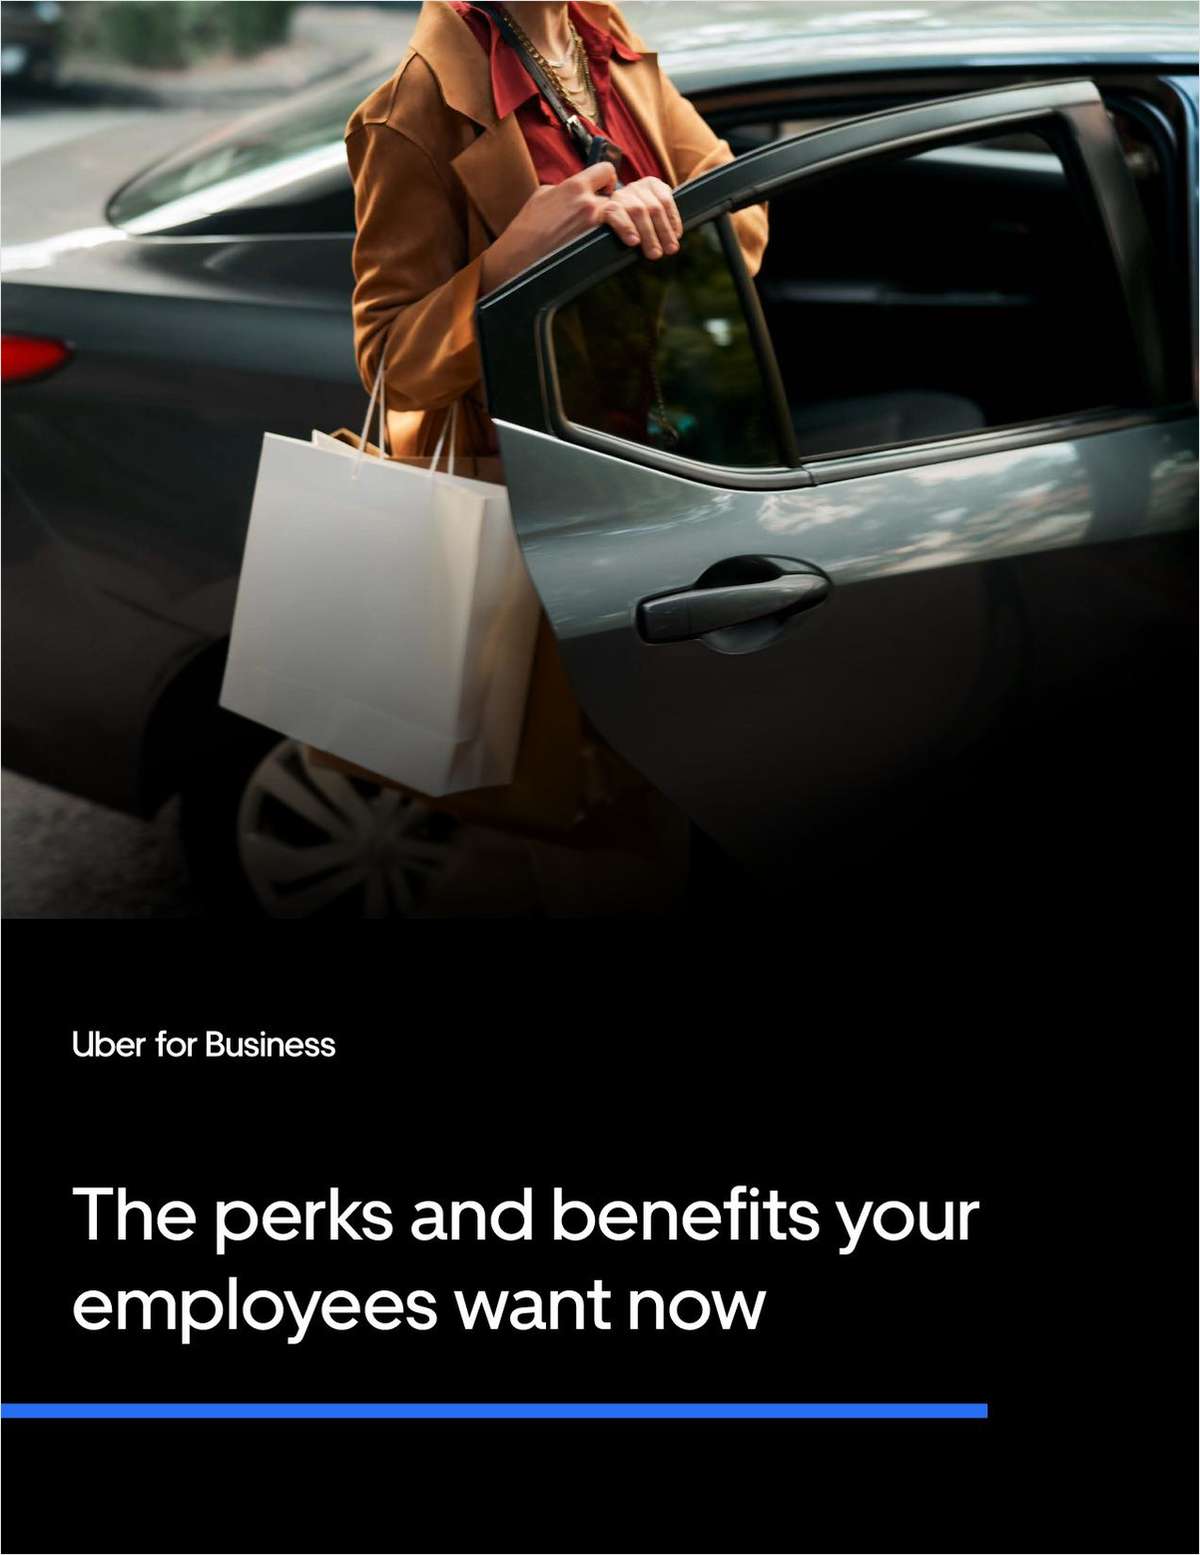 The perks and benefits your employees want now